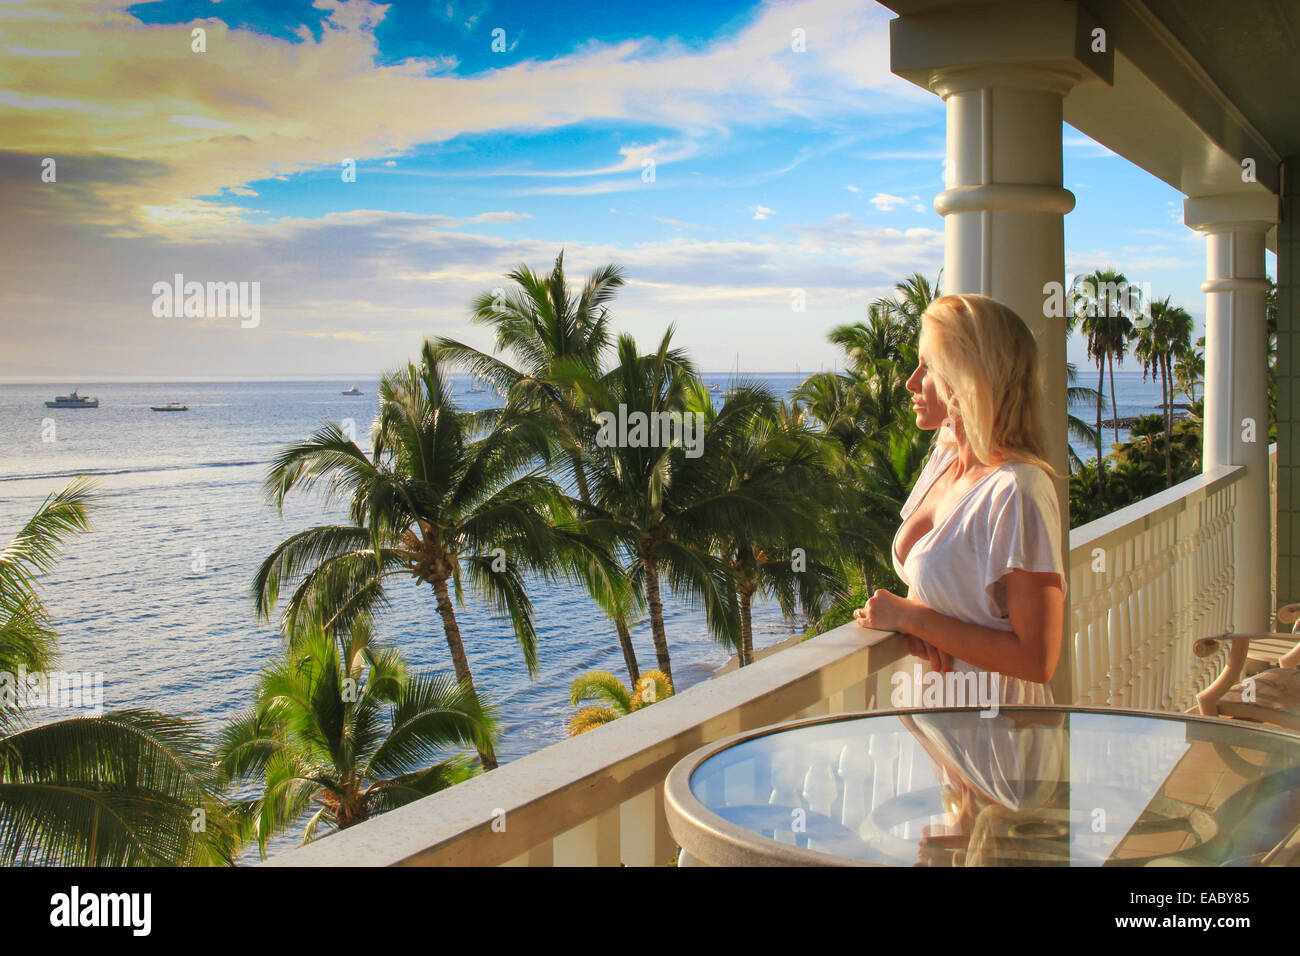 Attractive blonde lady in a tropical setting overlooking the beautiful sea from a balcony Stock Photo